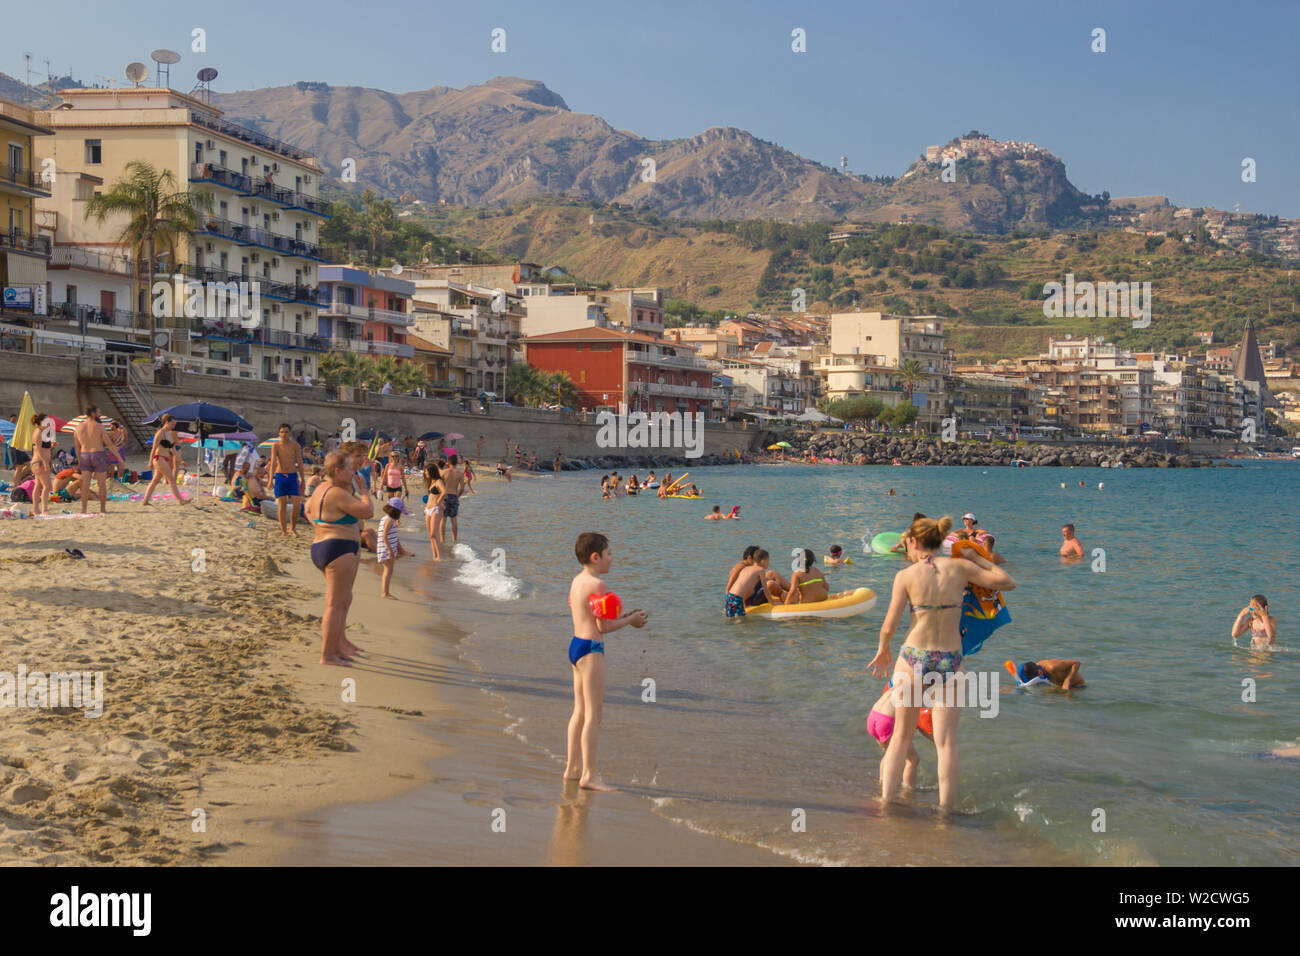 Giardini Naxos Sicily Italy 2019 Summer enjoyment at beach for people and tourists coming to this beautiful popular holiday location Stock Photo